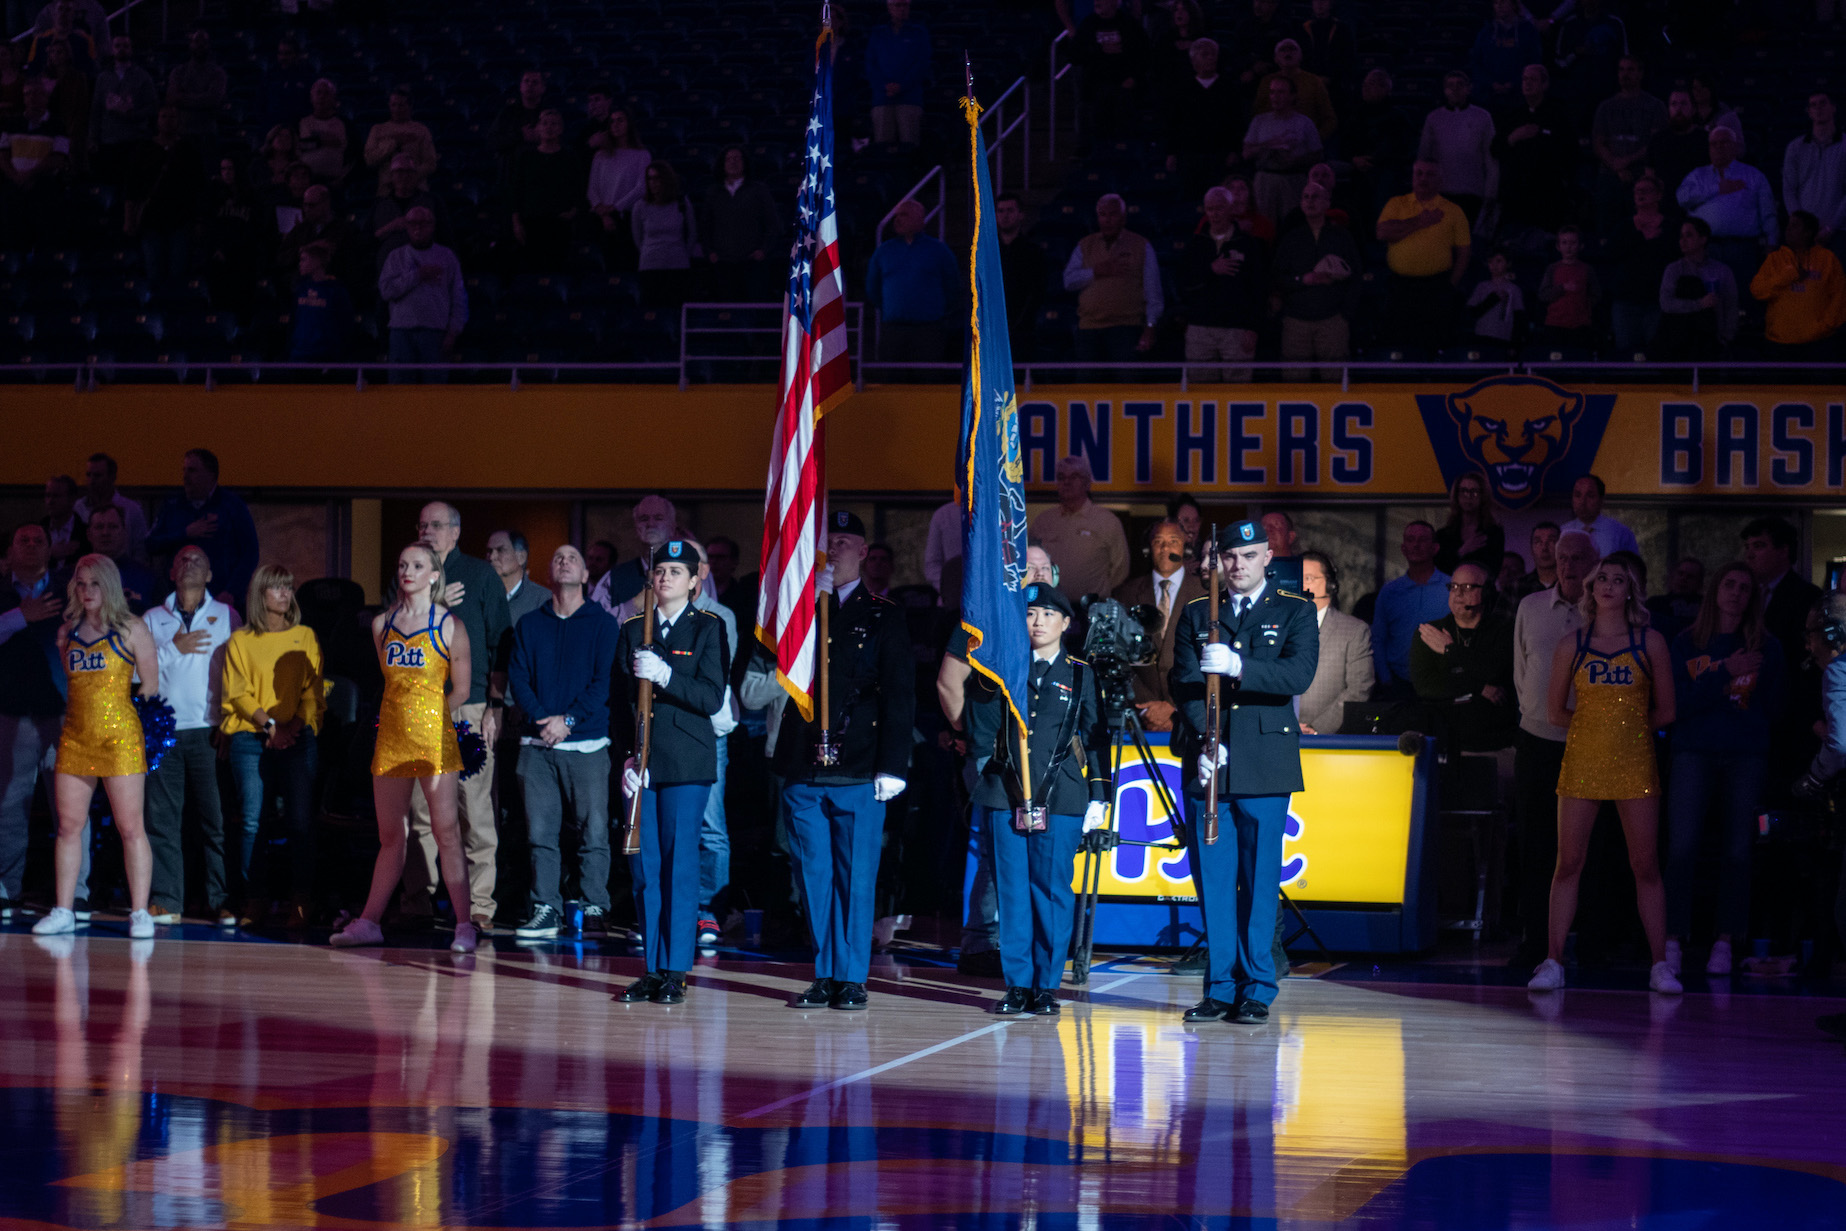 Cadets are the color guard at a Pitt basketball game.